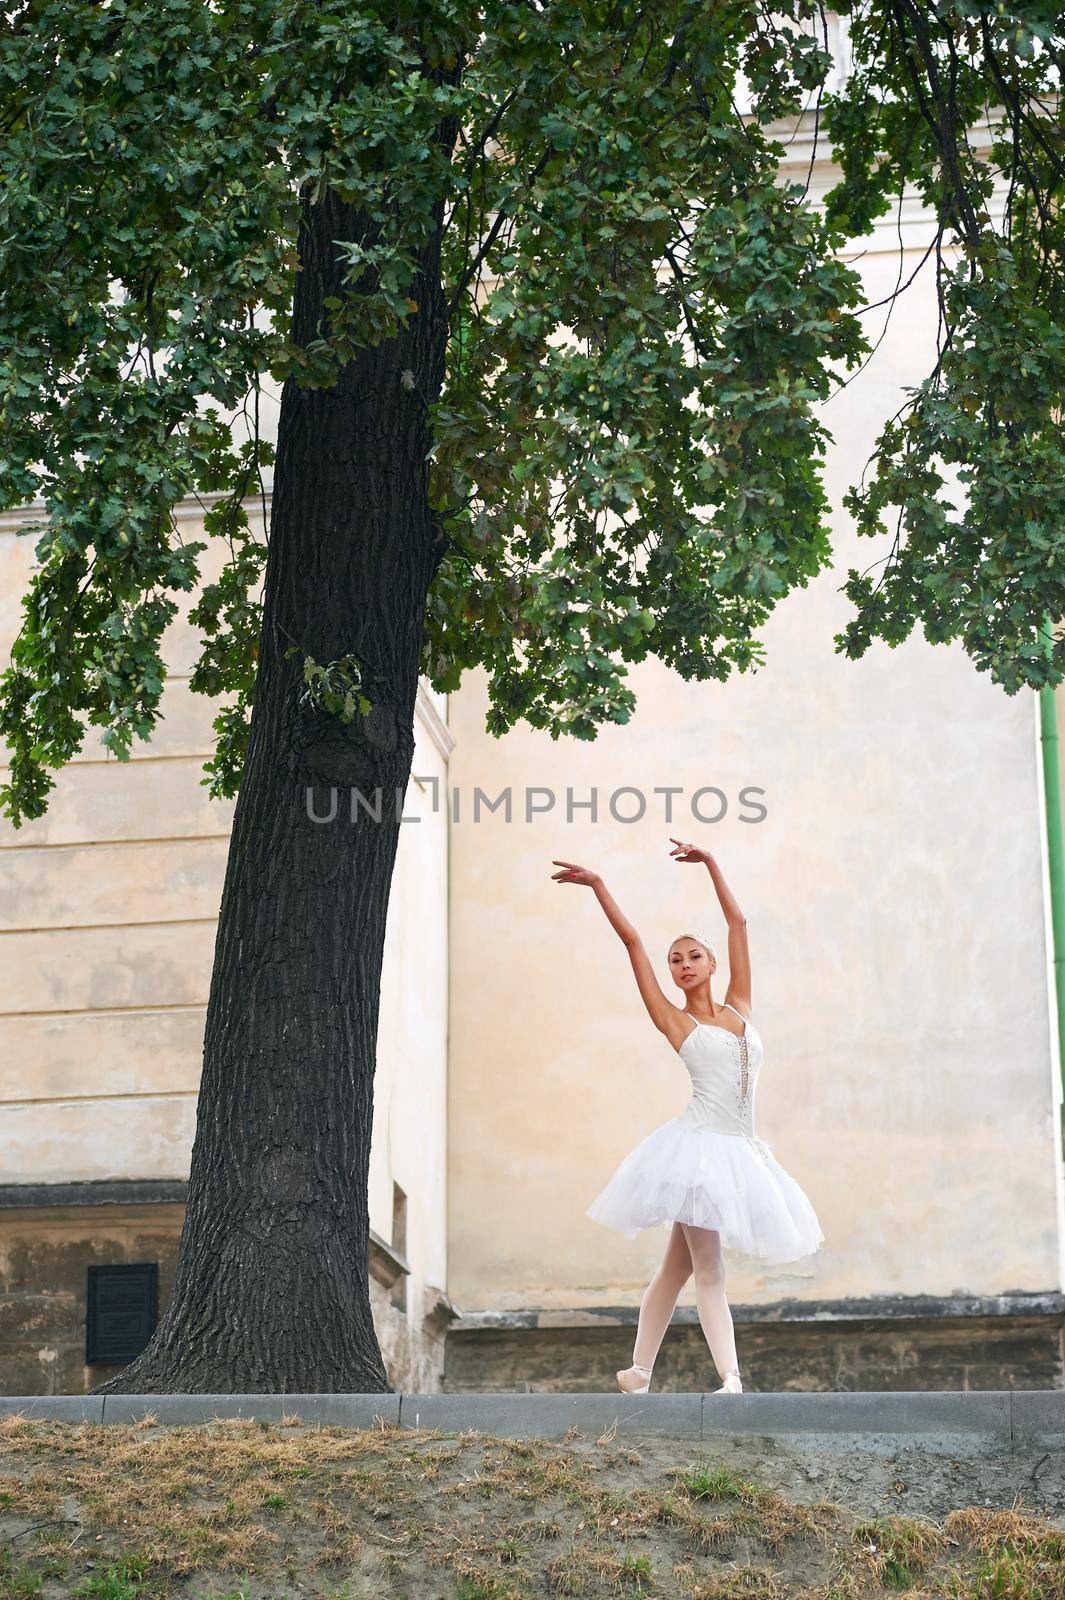 Professional female ballet dancer performing under the big tree outdoors dancing art expressive beauty sensuality.